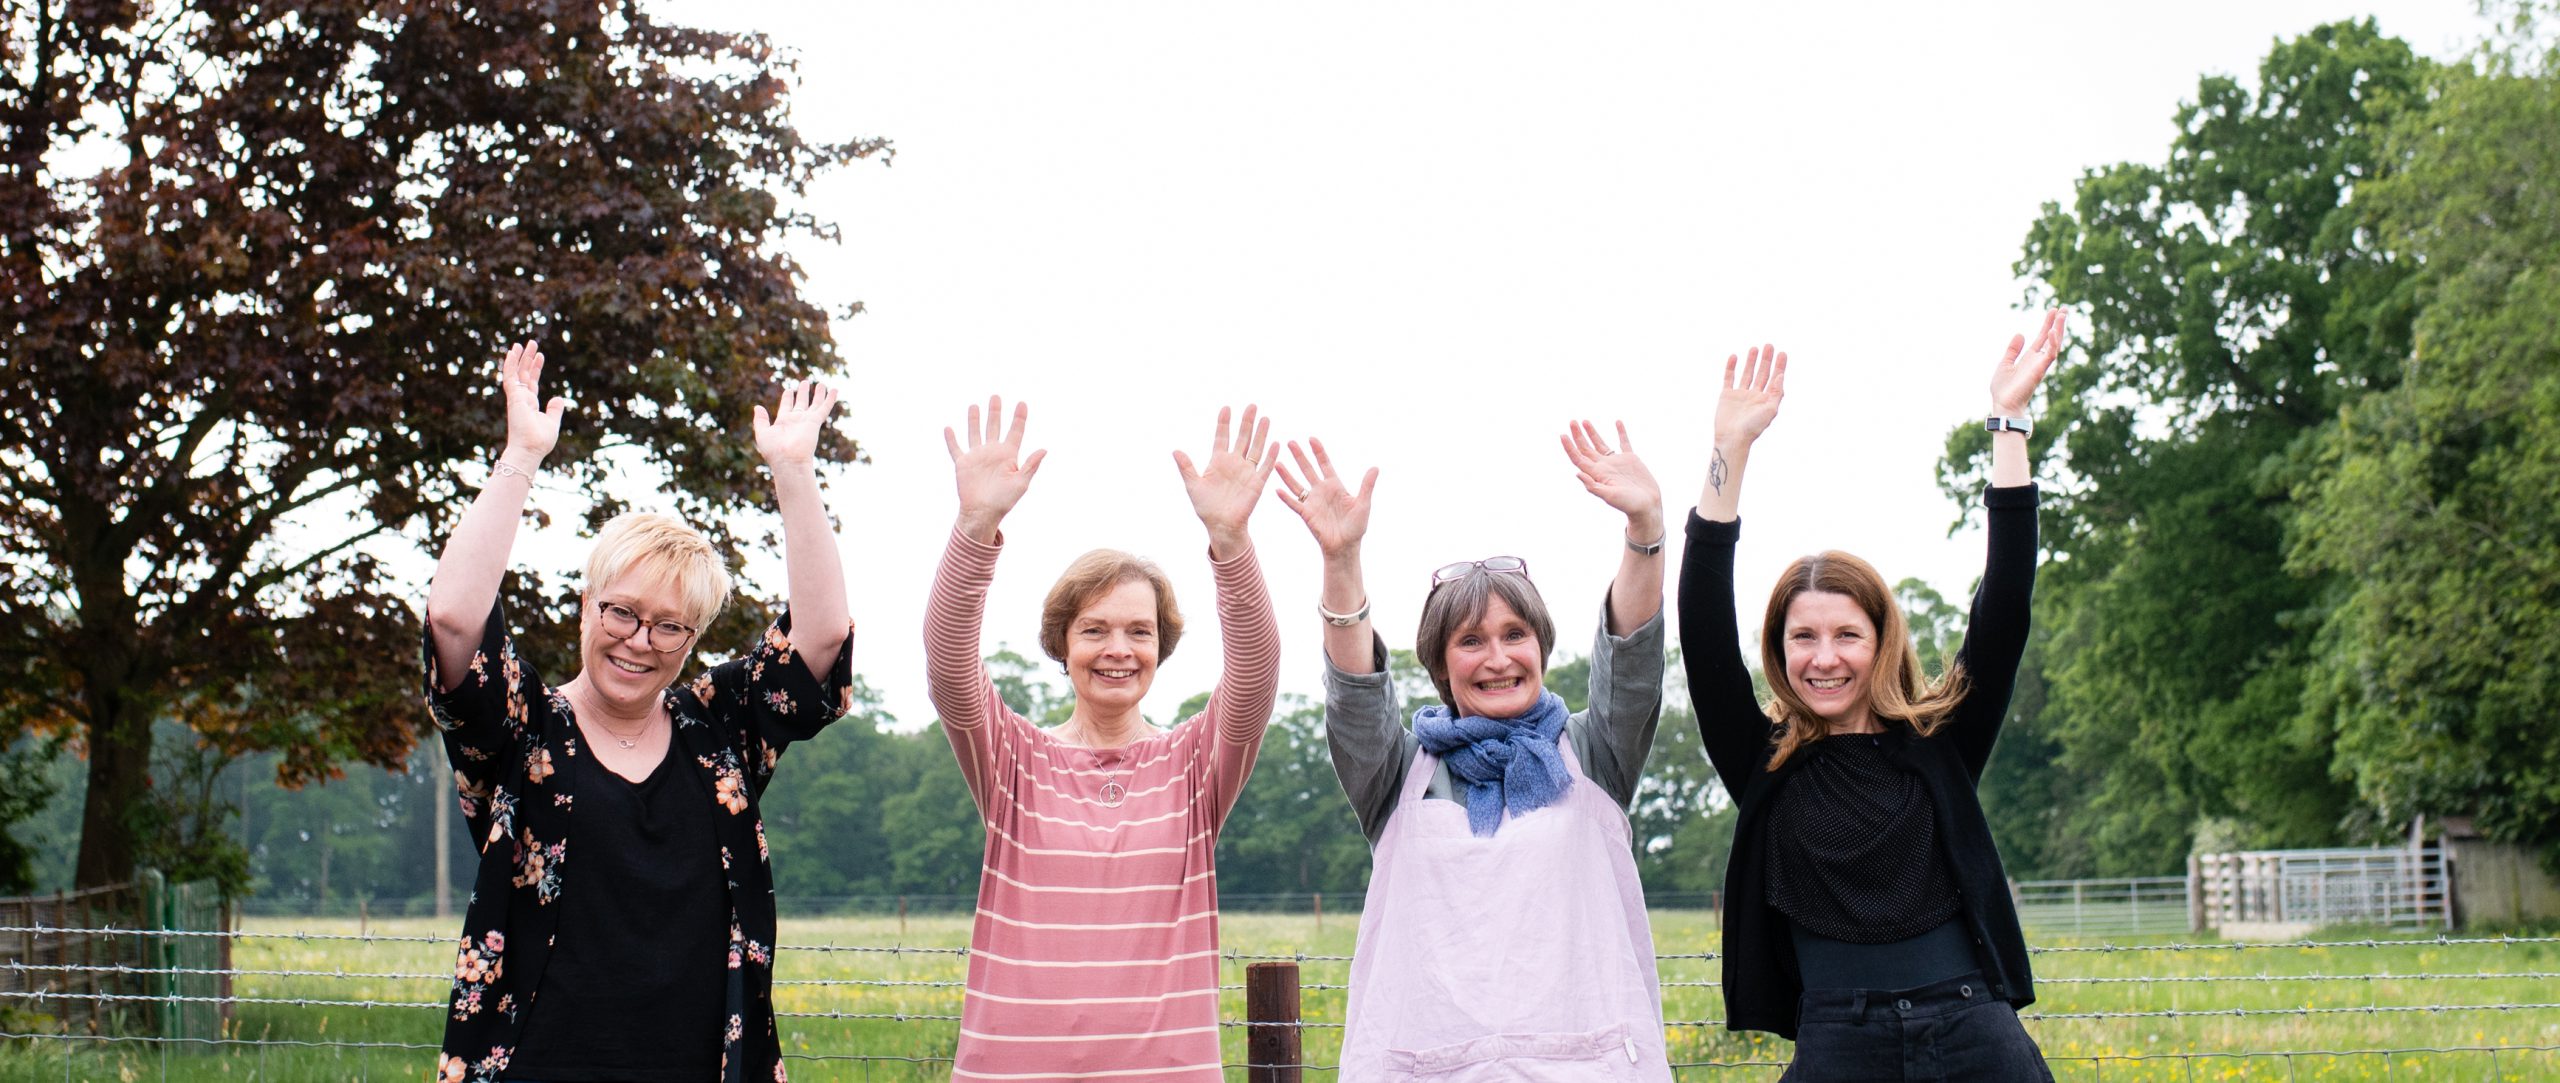 Members of wistow gallery outside waving there hands up in the air with big smiles on their faces and wistow countryside behind them.